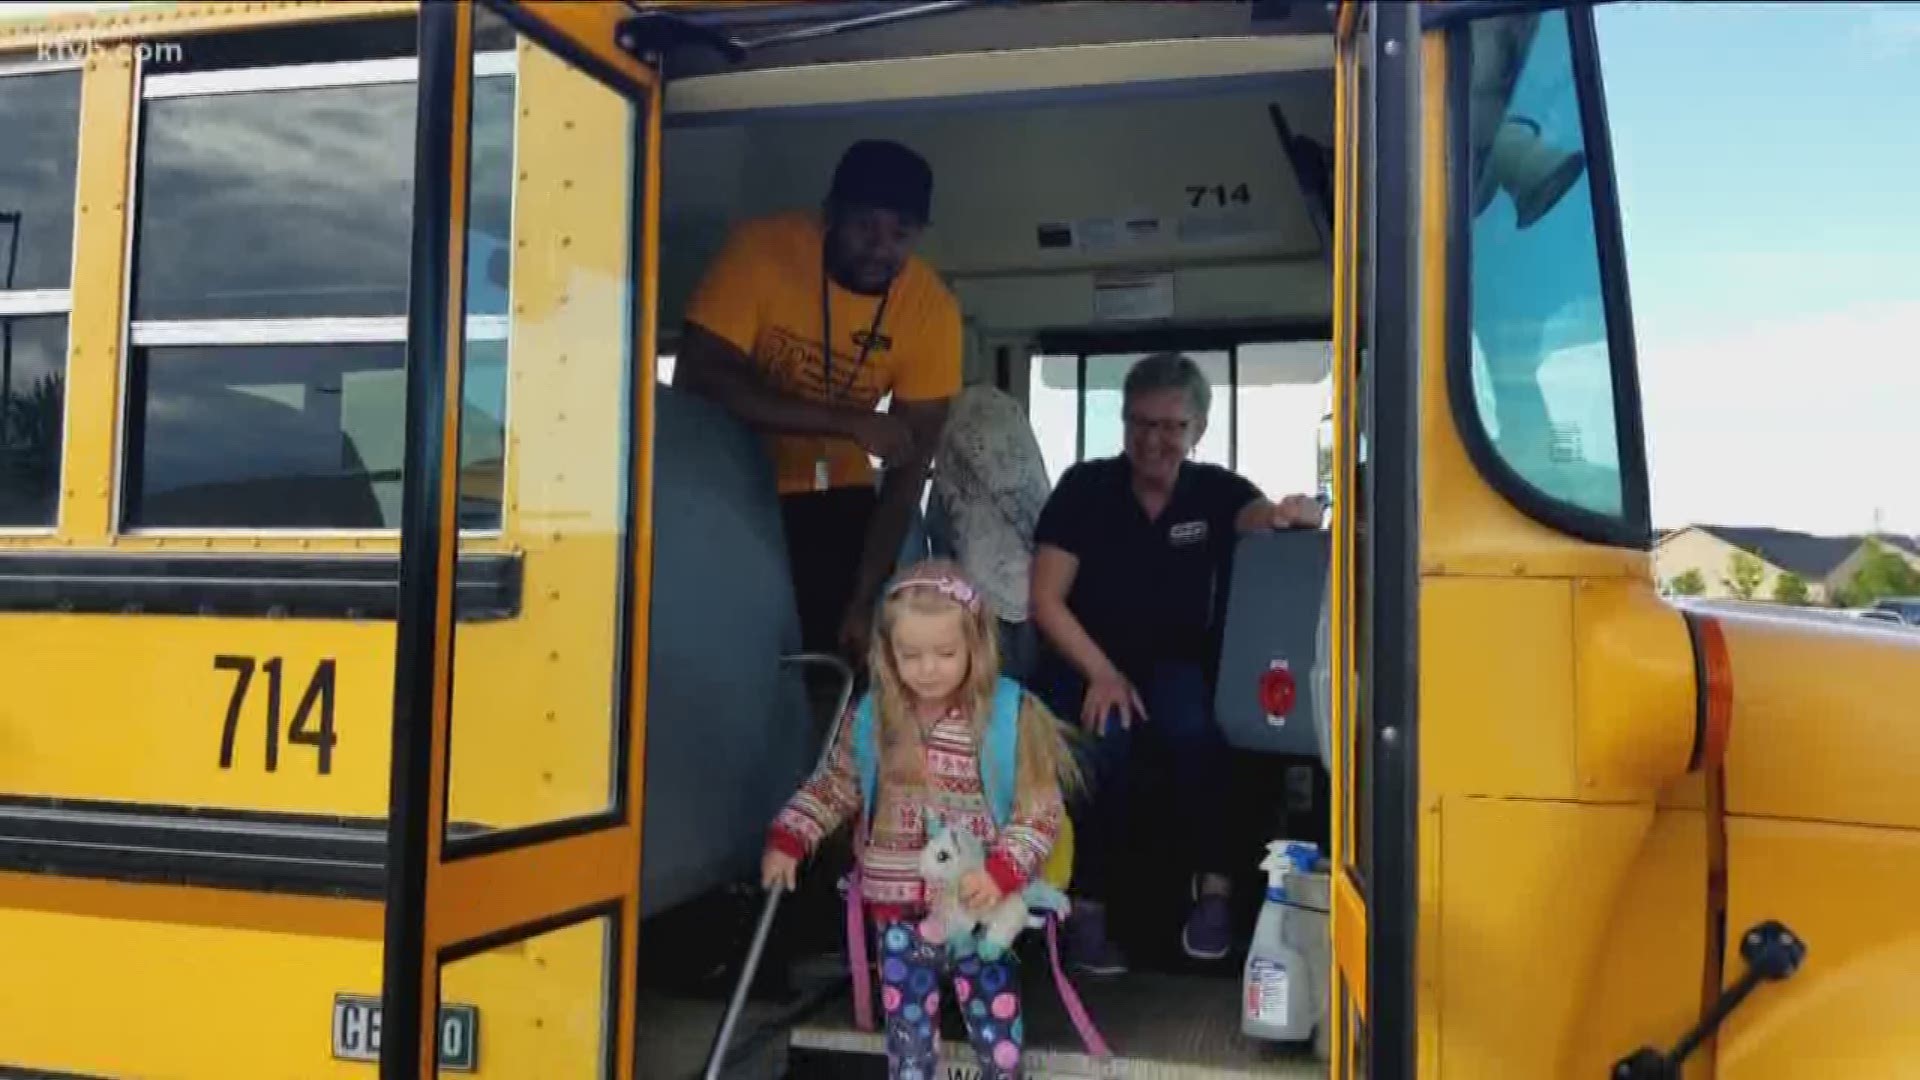 For one Meridian family, their school bus driver and bus monitor help start each day with a smile. The family is recognizing the pair for every thing they do.